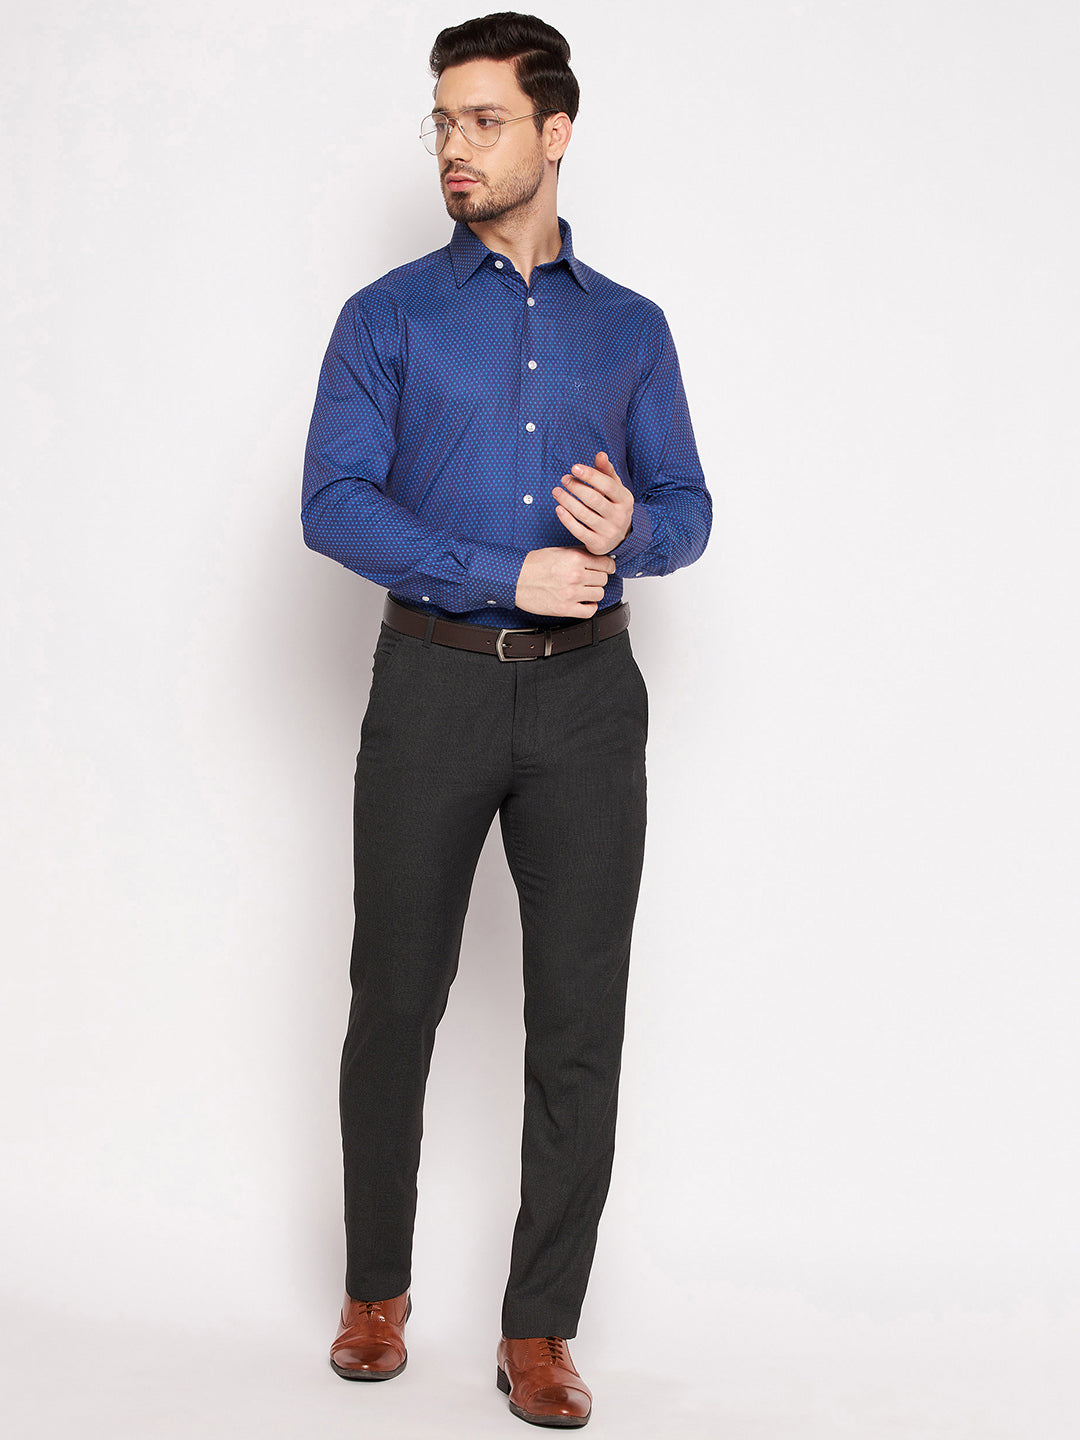 100 Royal Blue Dress Shirt Stock Photos Pictures  RoyaltyFree Images   iStock